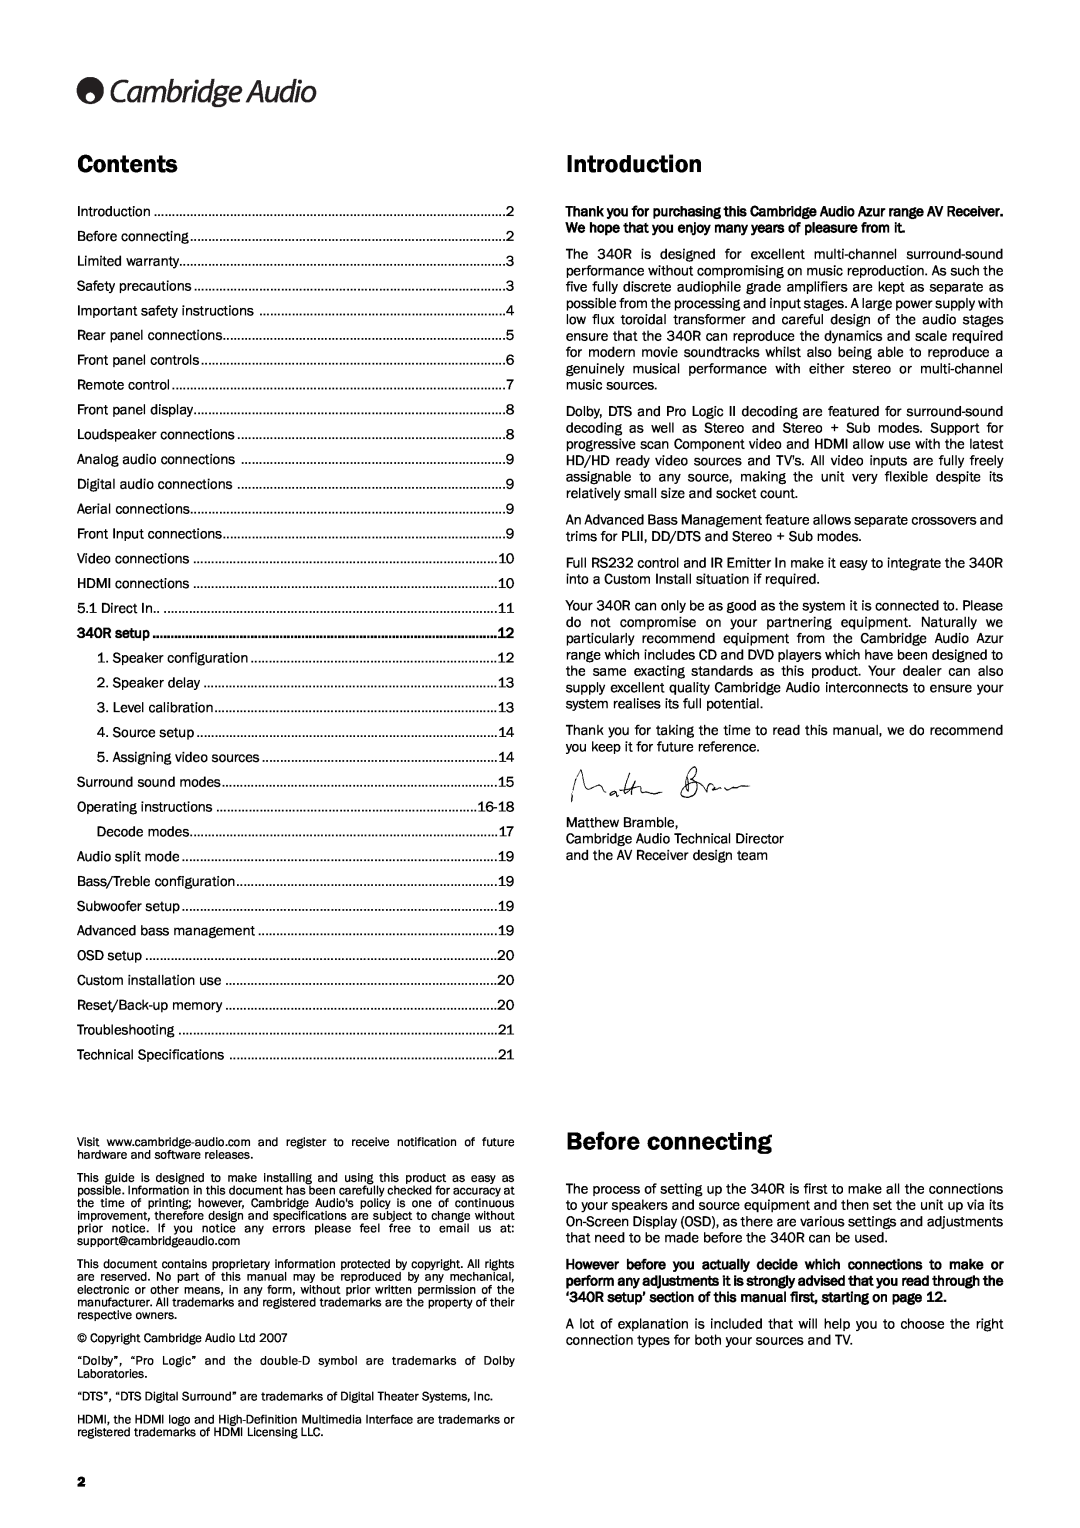 Cambridge Audio 340Razur user manual Contents, Introduction, Before connecting 